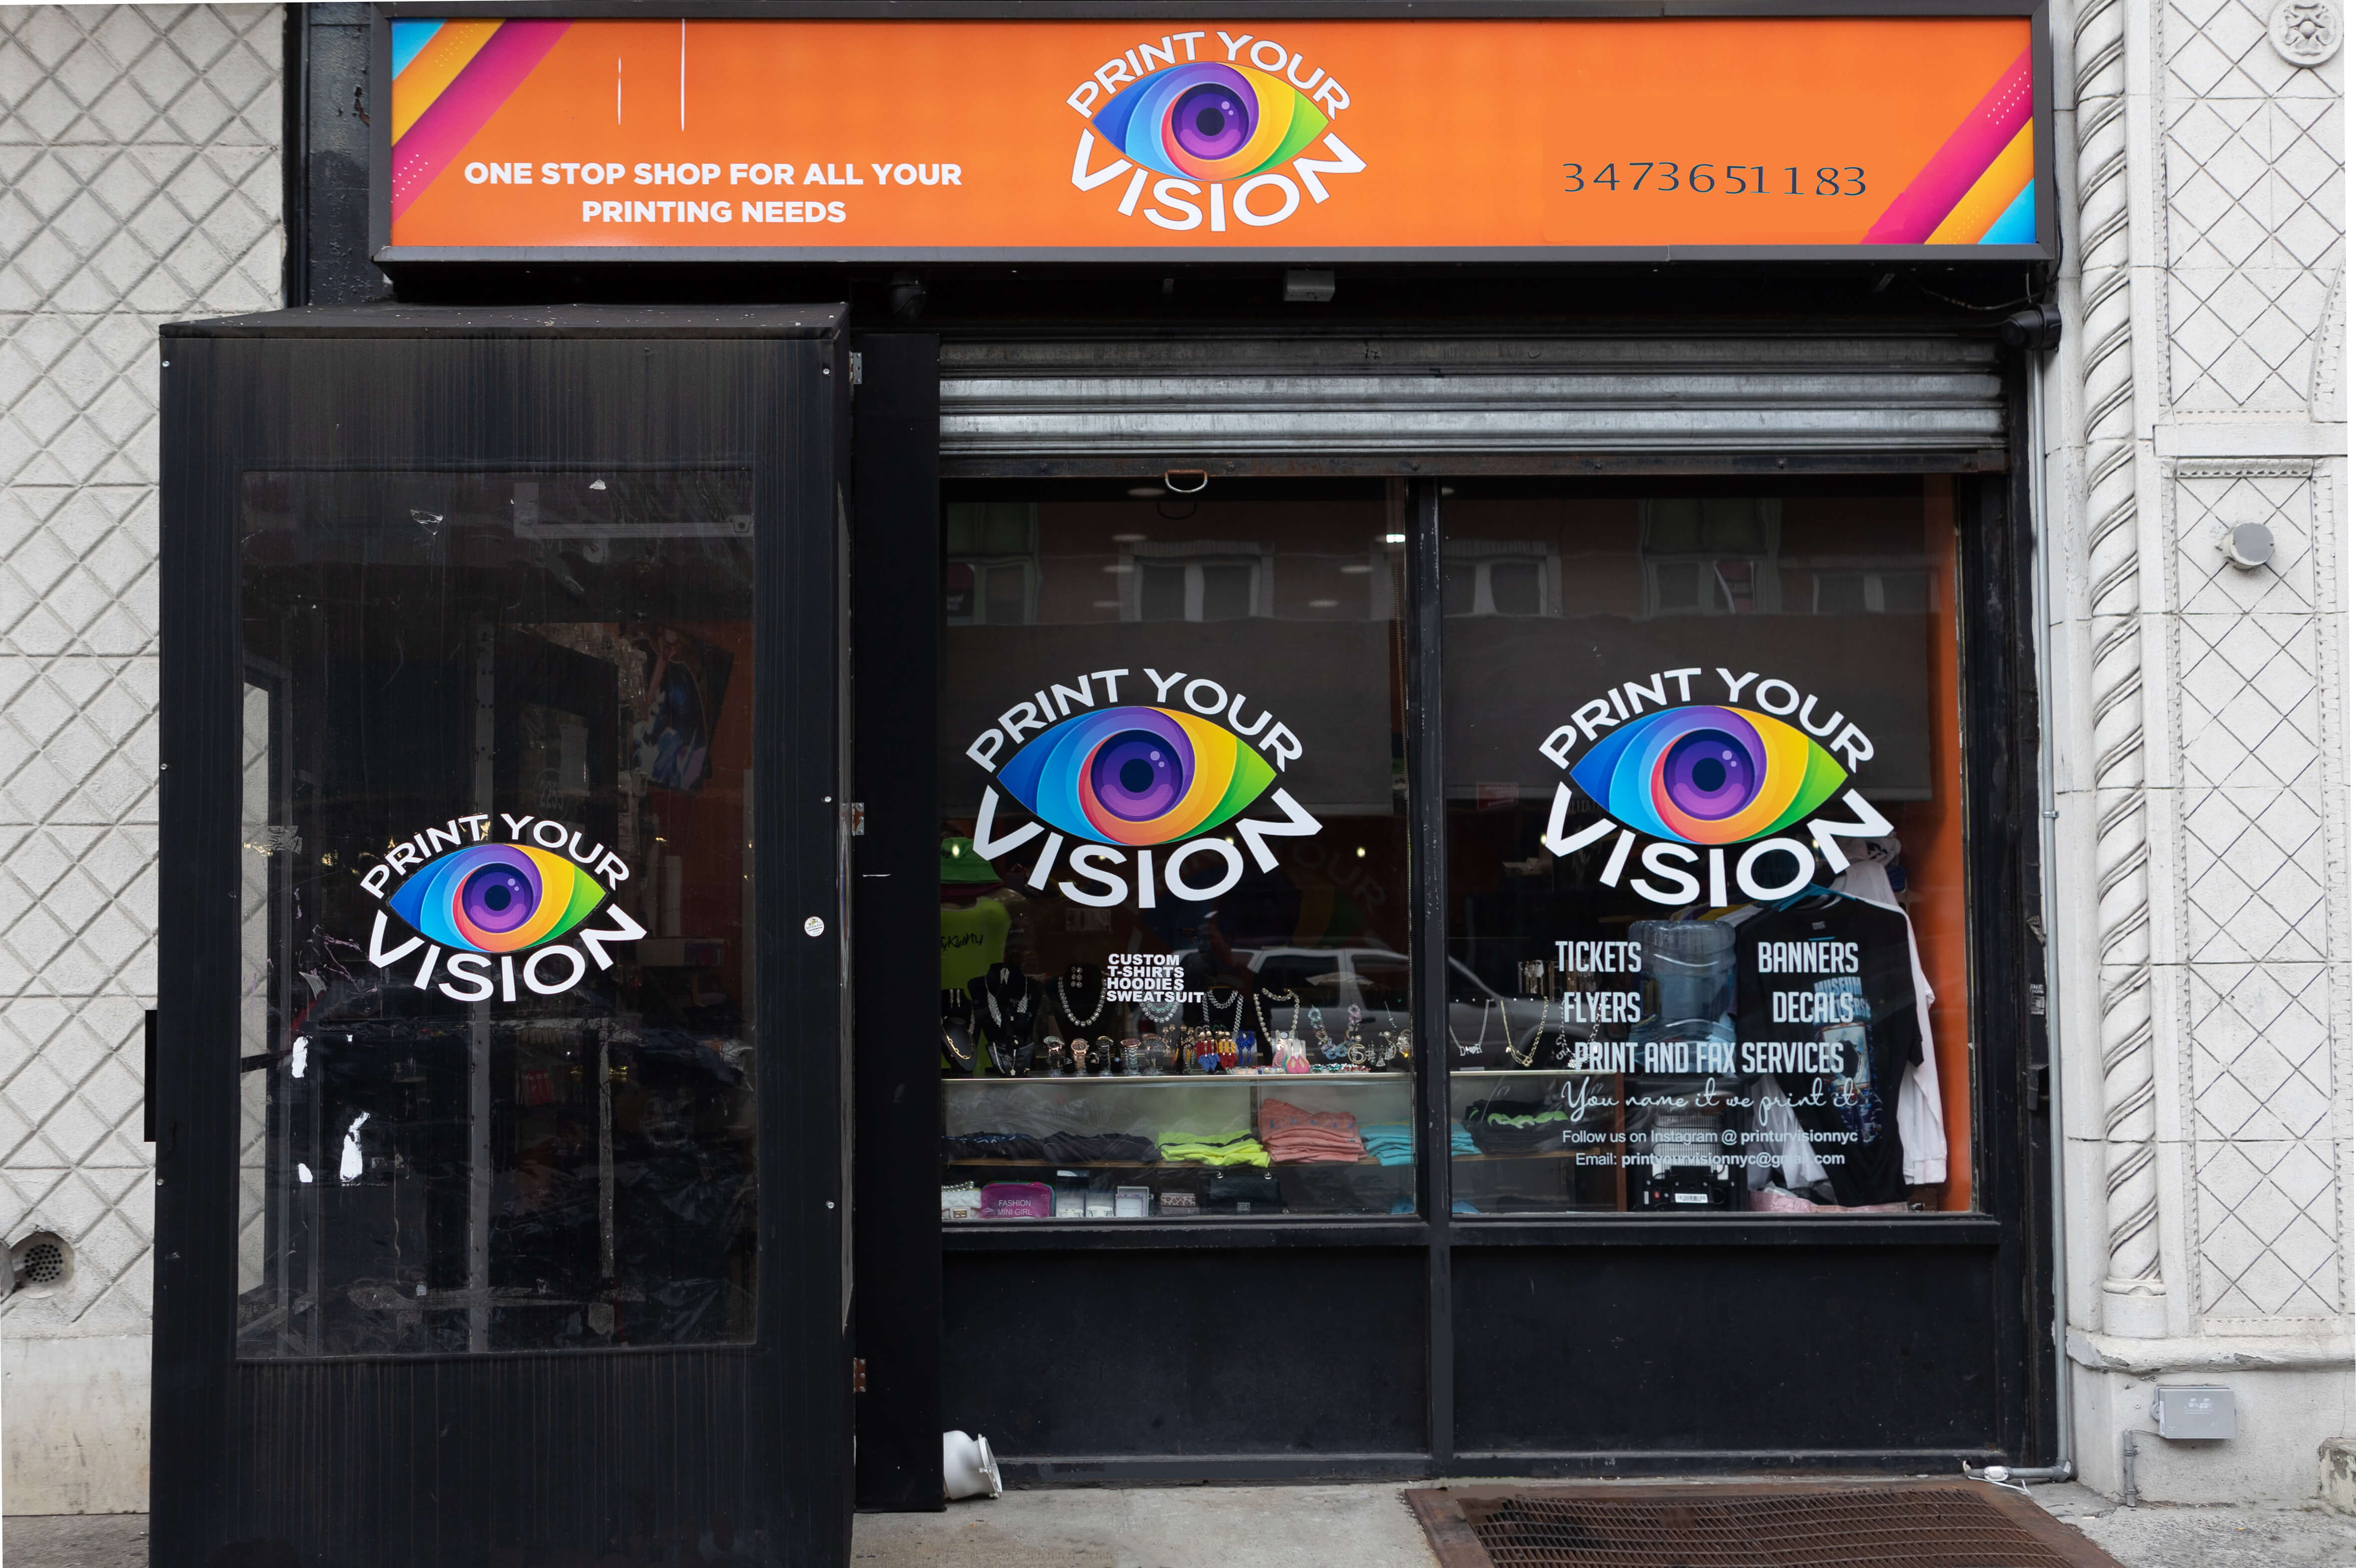 Print Your Vision Store